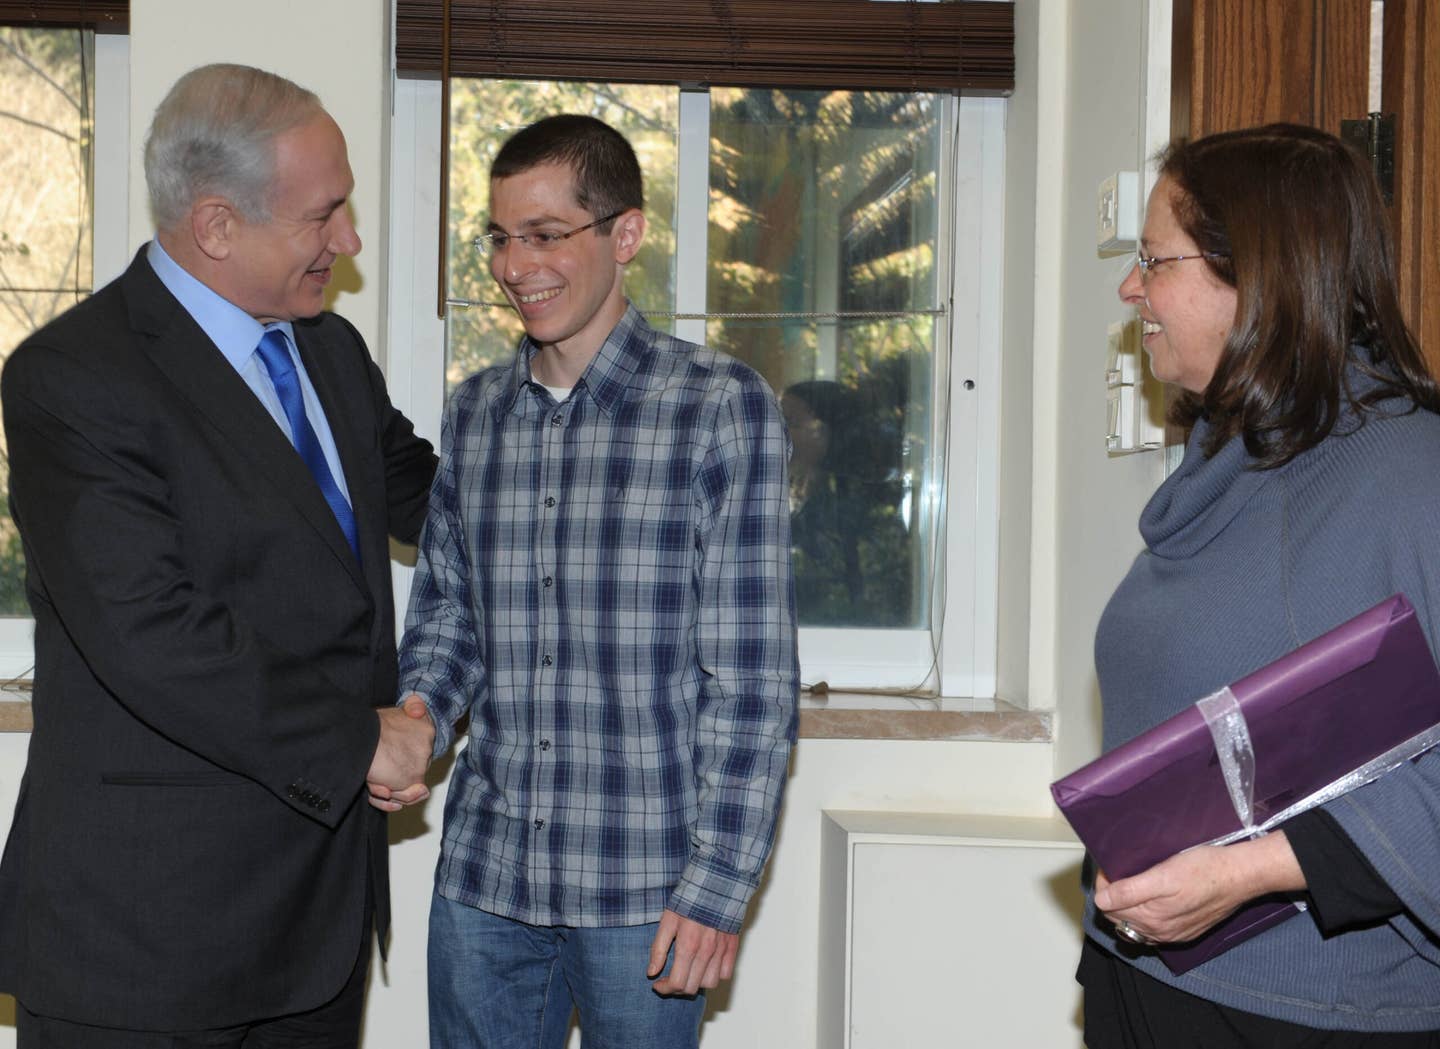 Israeli Prime Minister Benjamin Netanyahu meets with Gilad Shalit five months after his release on March 29, 2012, in Tel Aviv, Israel. Gilad Shalit was released on October 18, 2011, as part of a prisoner exchange, after being held captive by Hamas militants in the Gaza Strip for more than five years. (Photo by Moshe Milner/GPO via Getty Images)